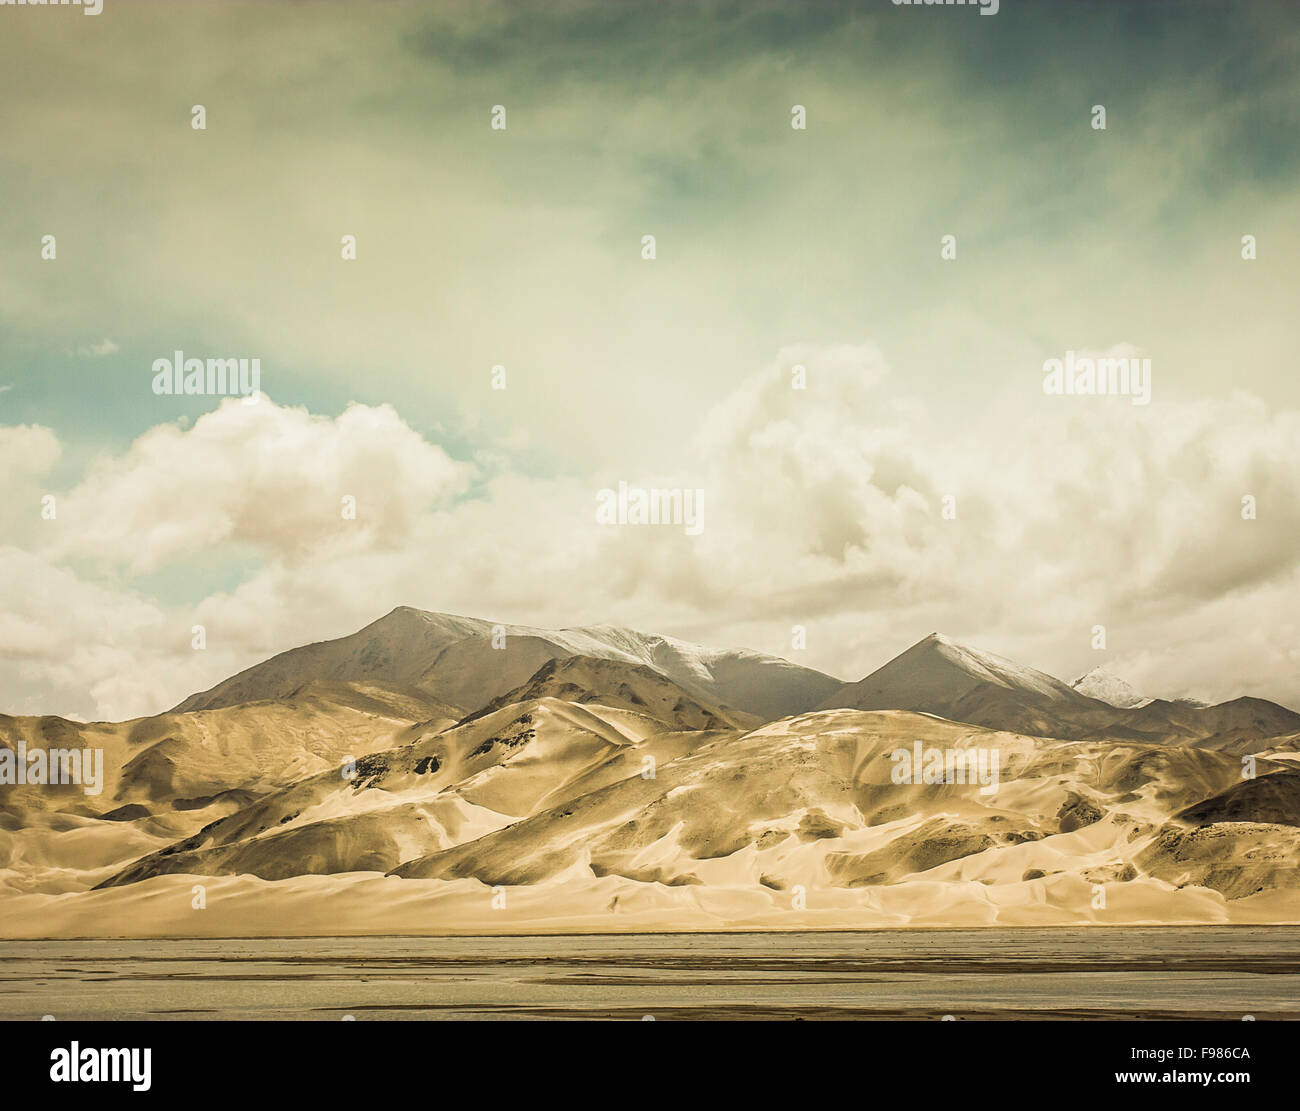 Desert mountains in Central Asia Stock Photo